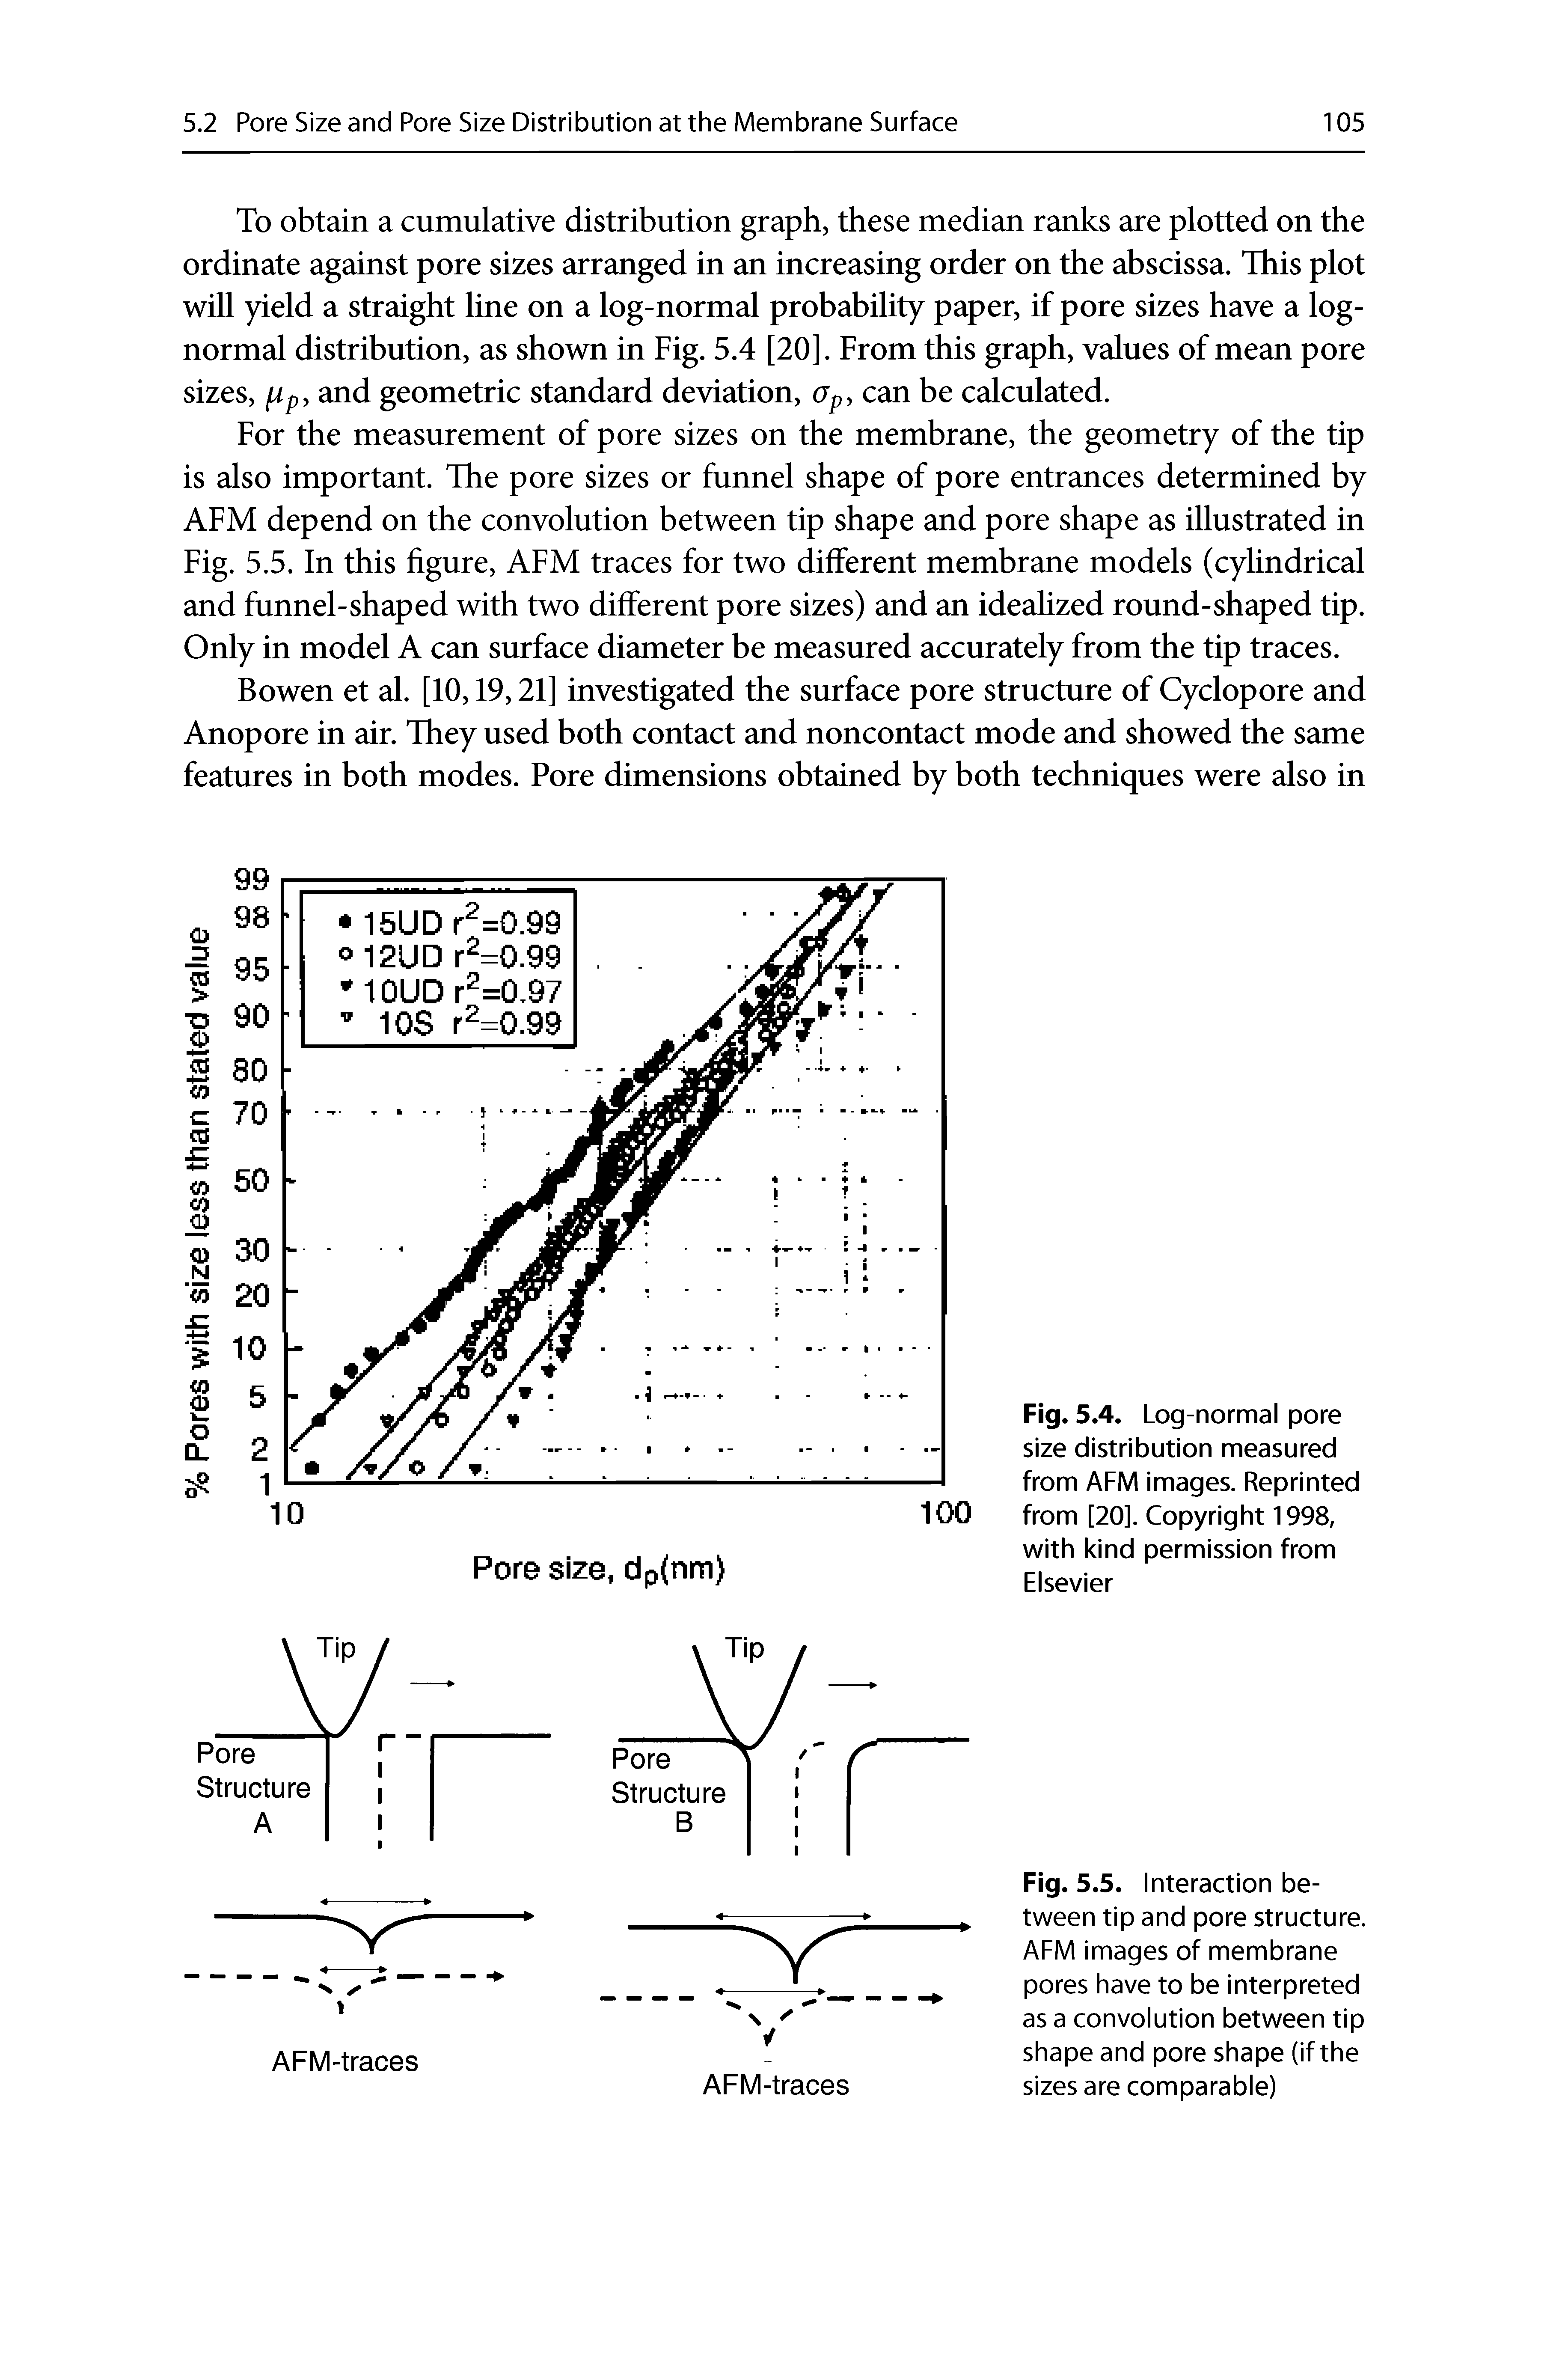 Fig. 5.4. Log-normal pore size distribution measured from AFM images. Reprinted from [20]. Copyright 1998, with kind permission from Elsevier...